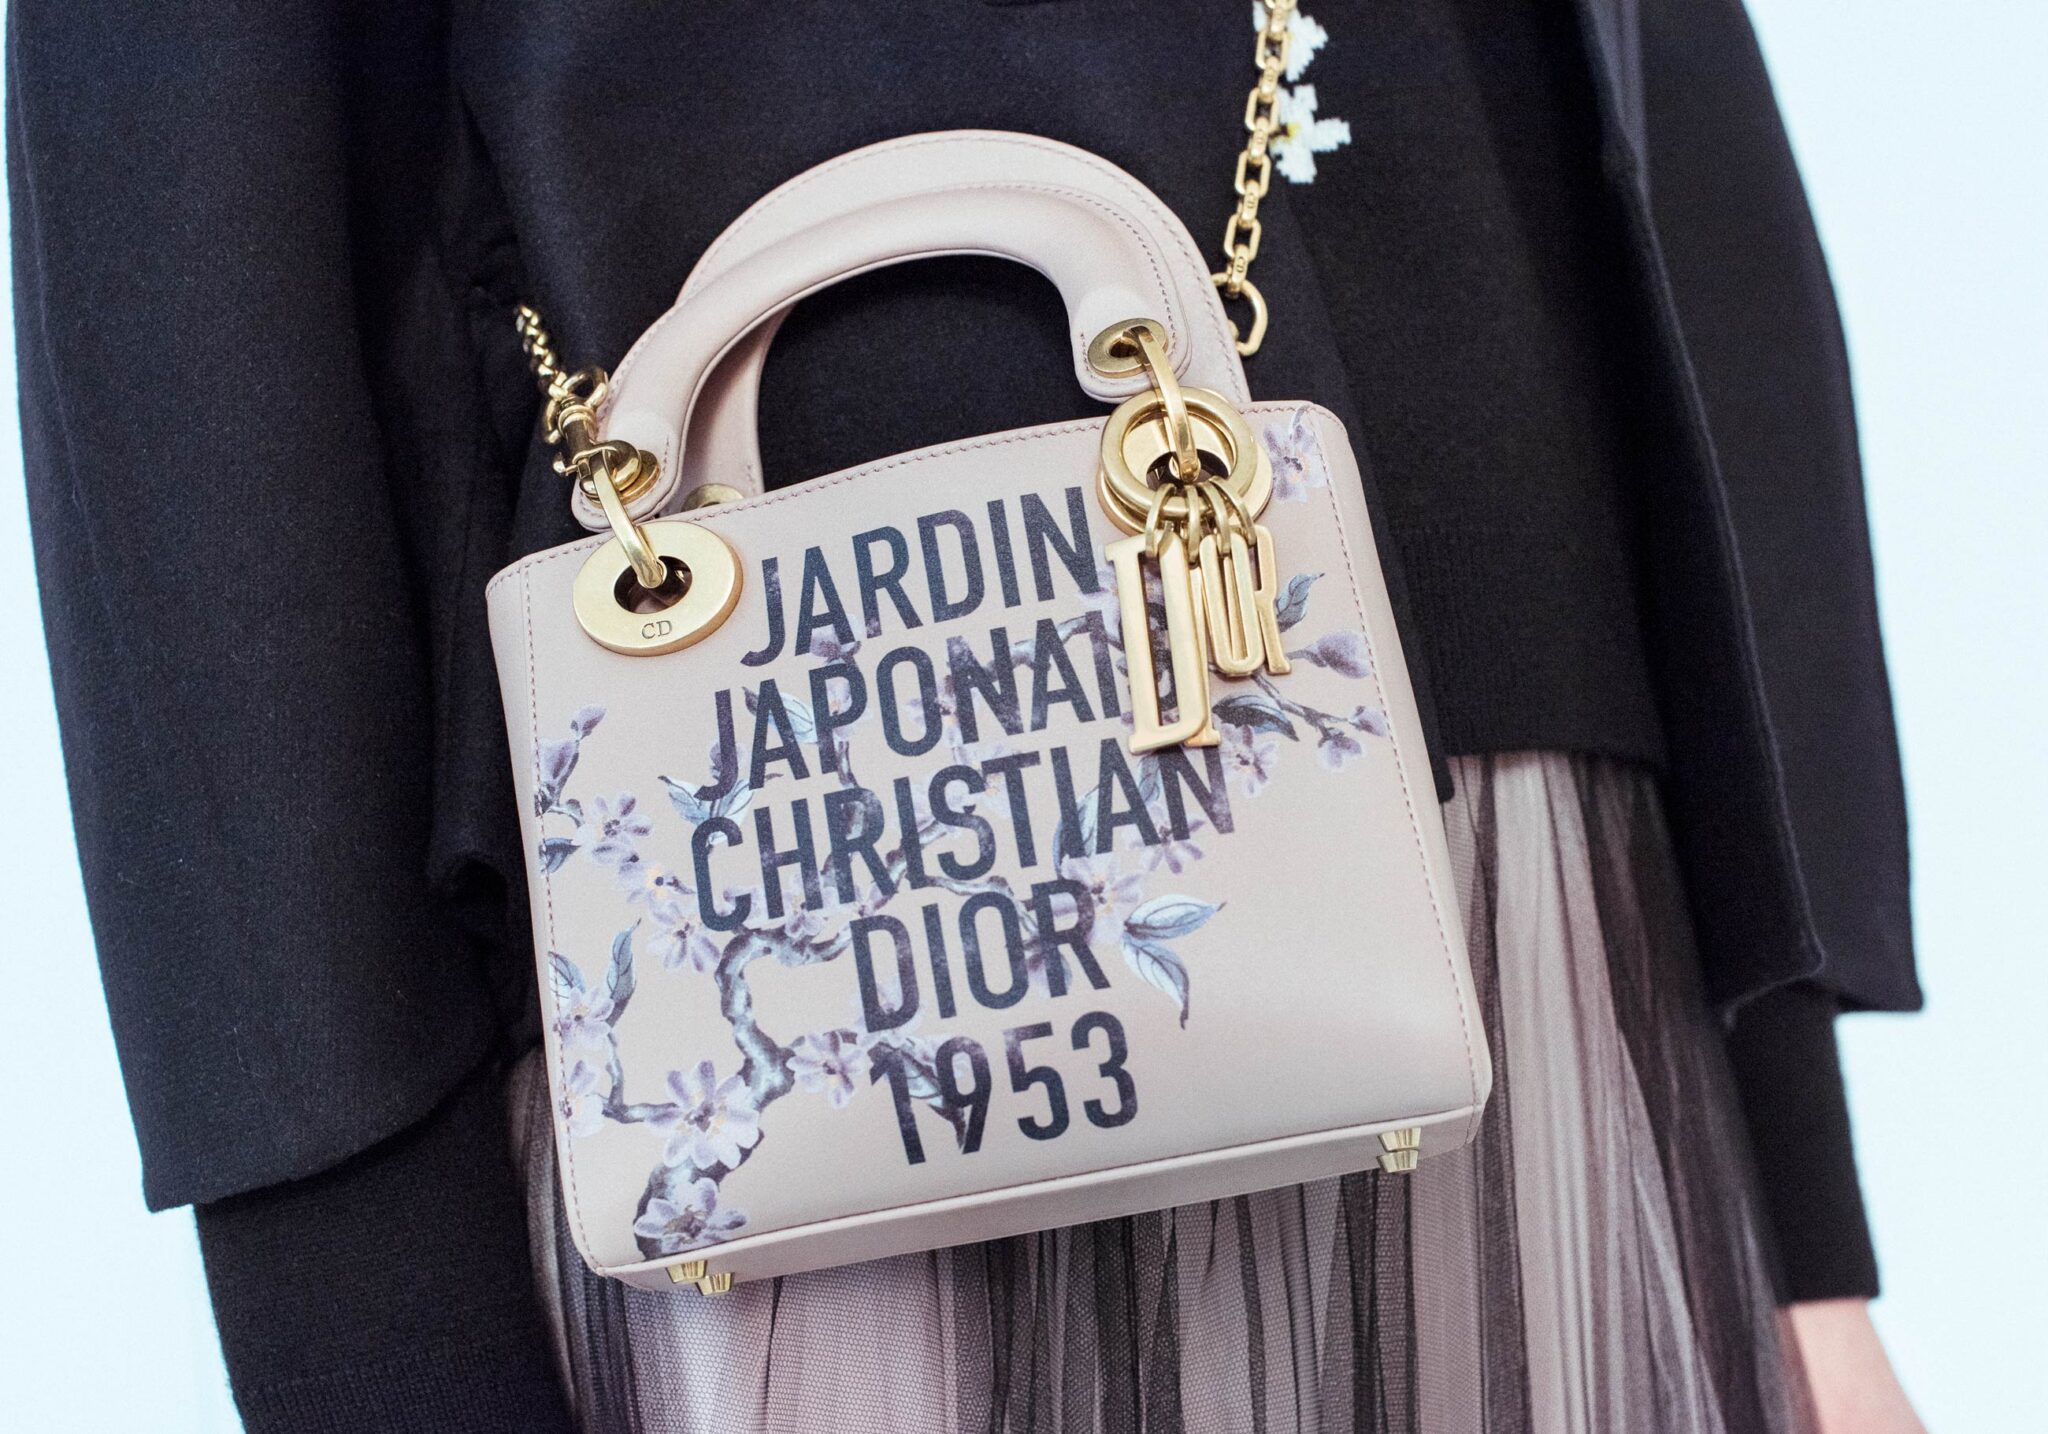 Dior Japan Capsule Collection 9